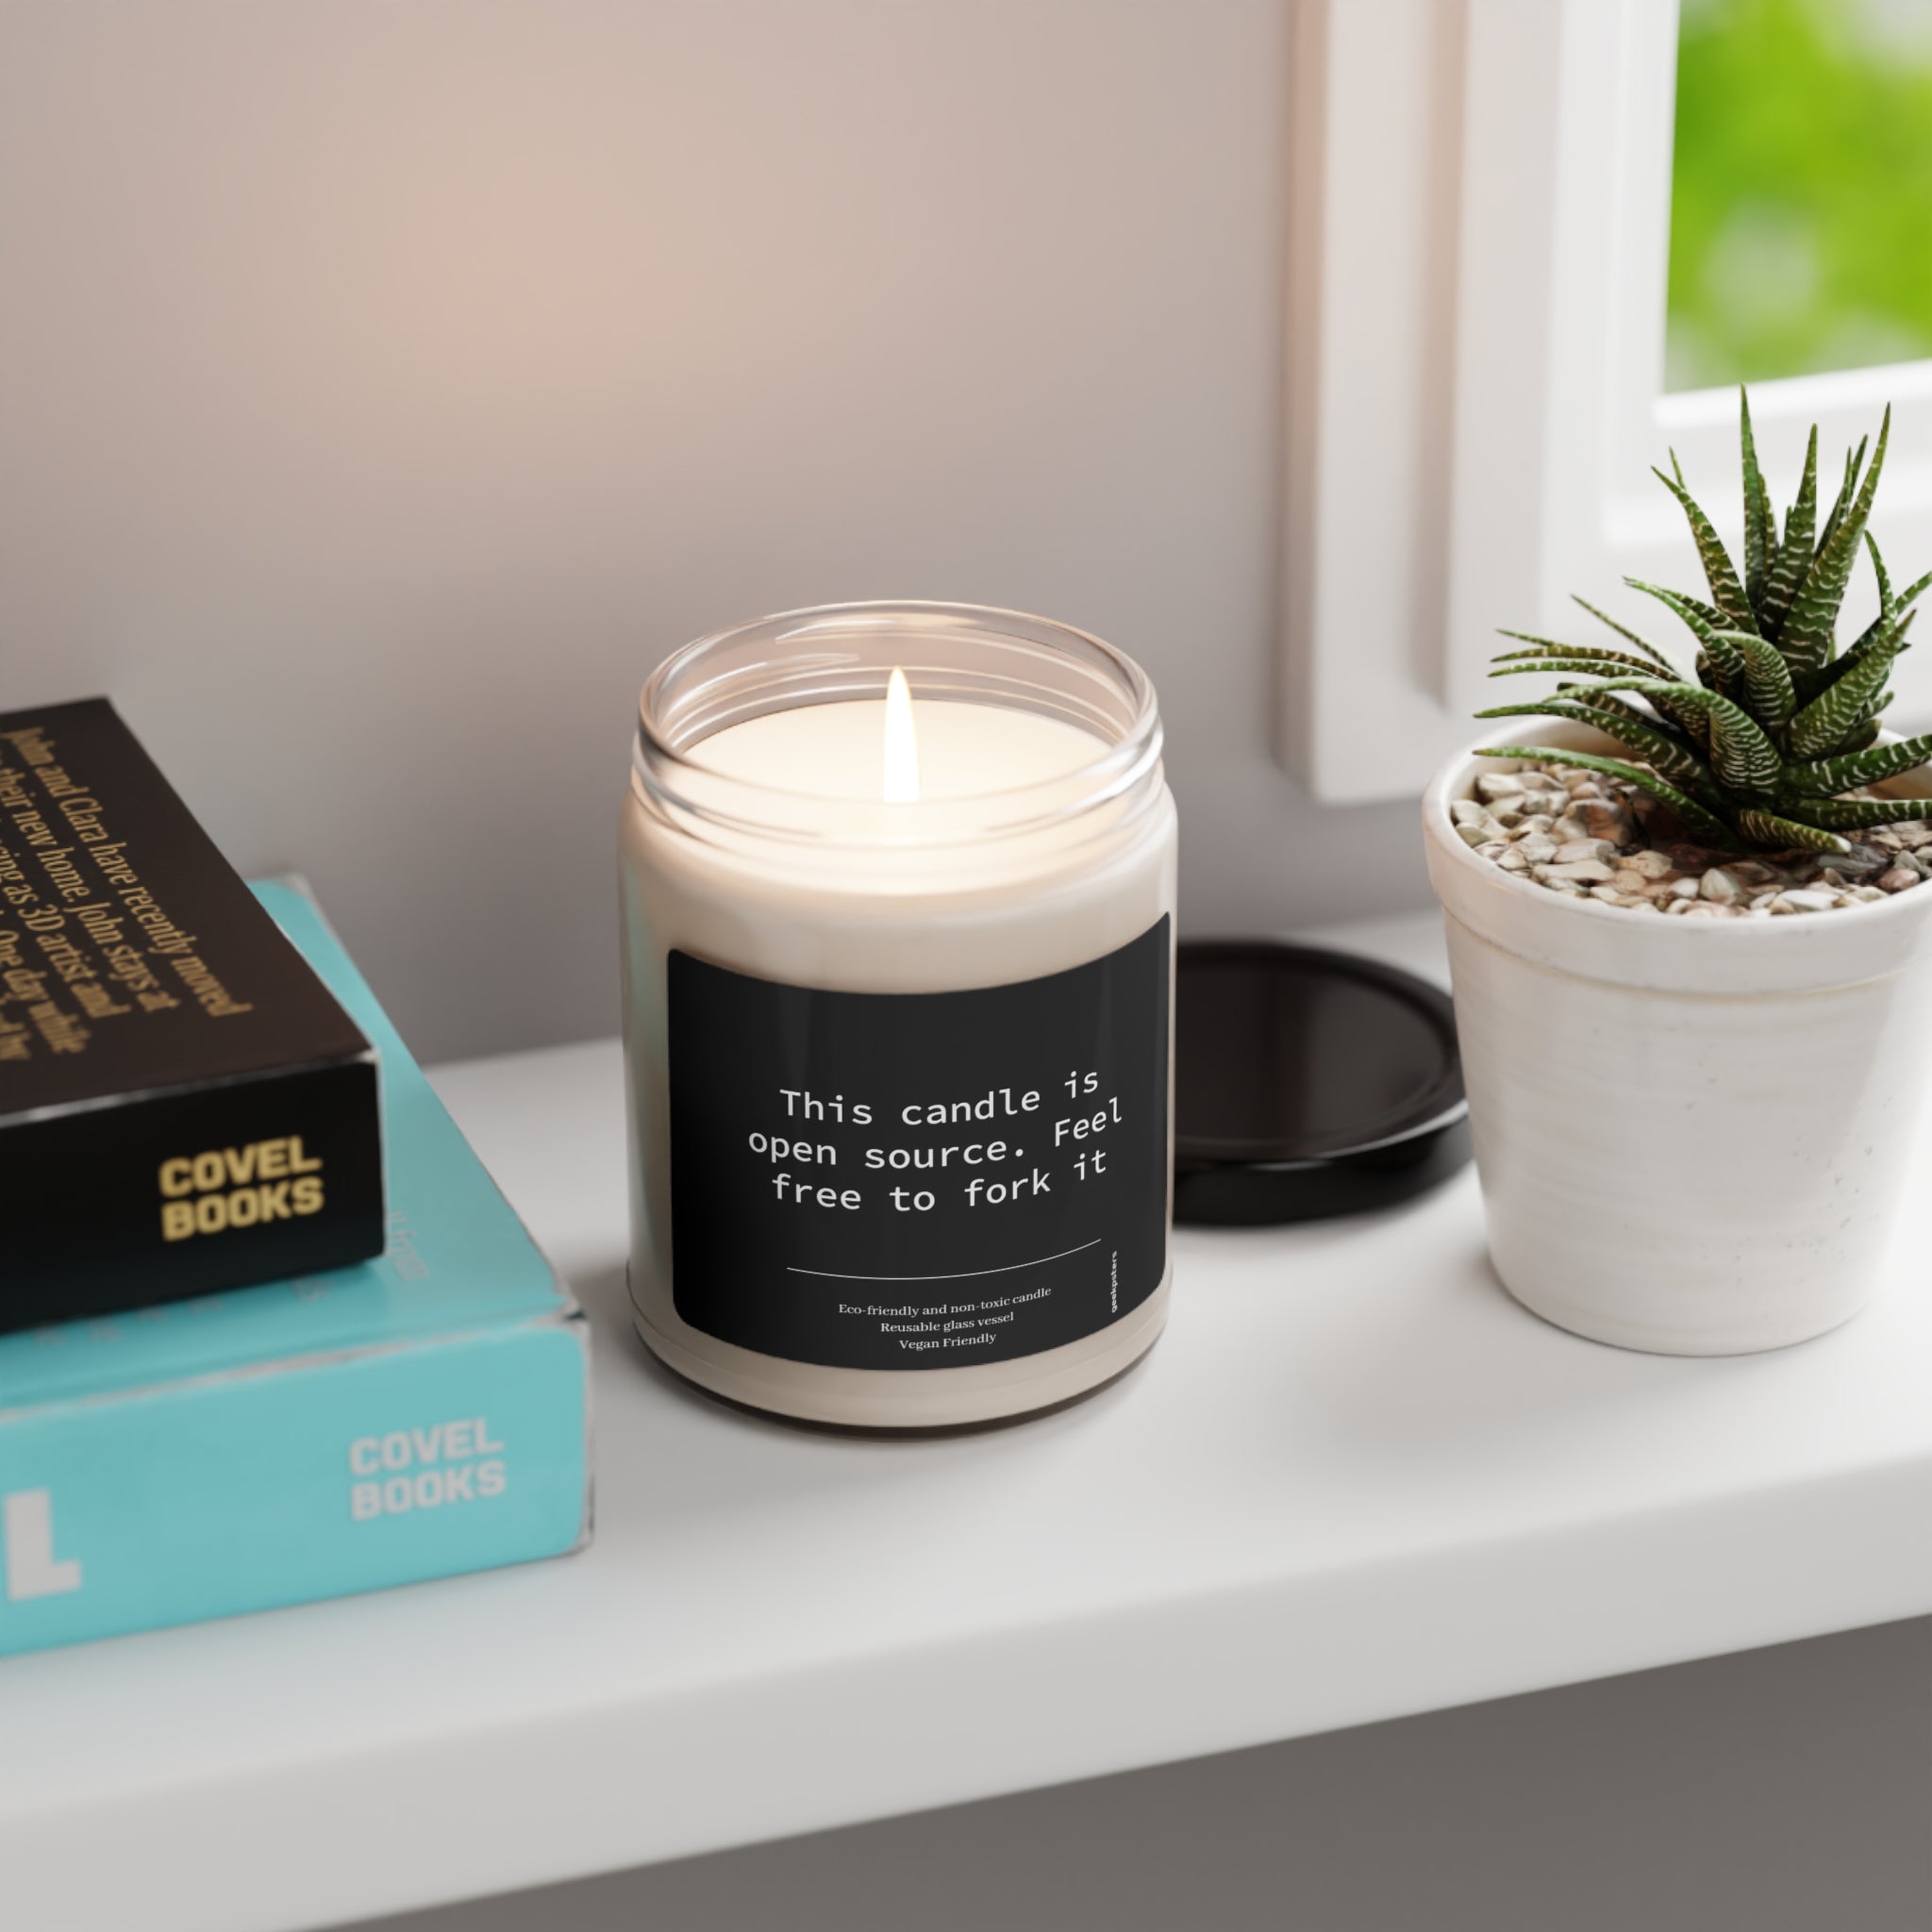 A "This Candle is Open Source - Feel Free to Fork It - Scented Soy Candle, 9oz" on a windowsill next to a potted plant, with books stacked alongside.